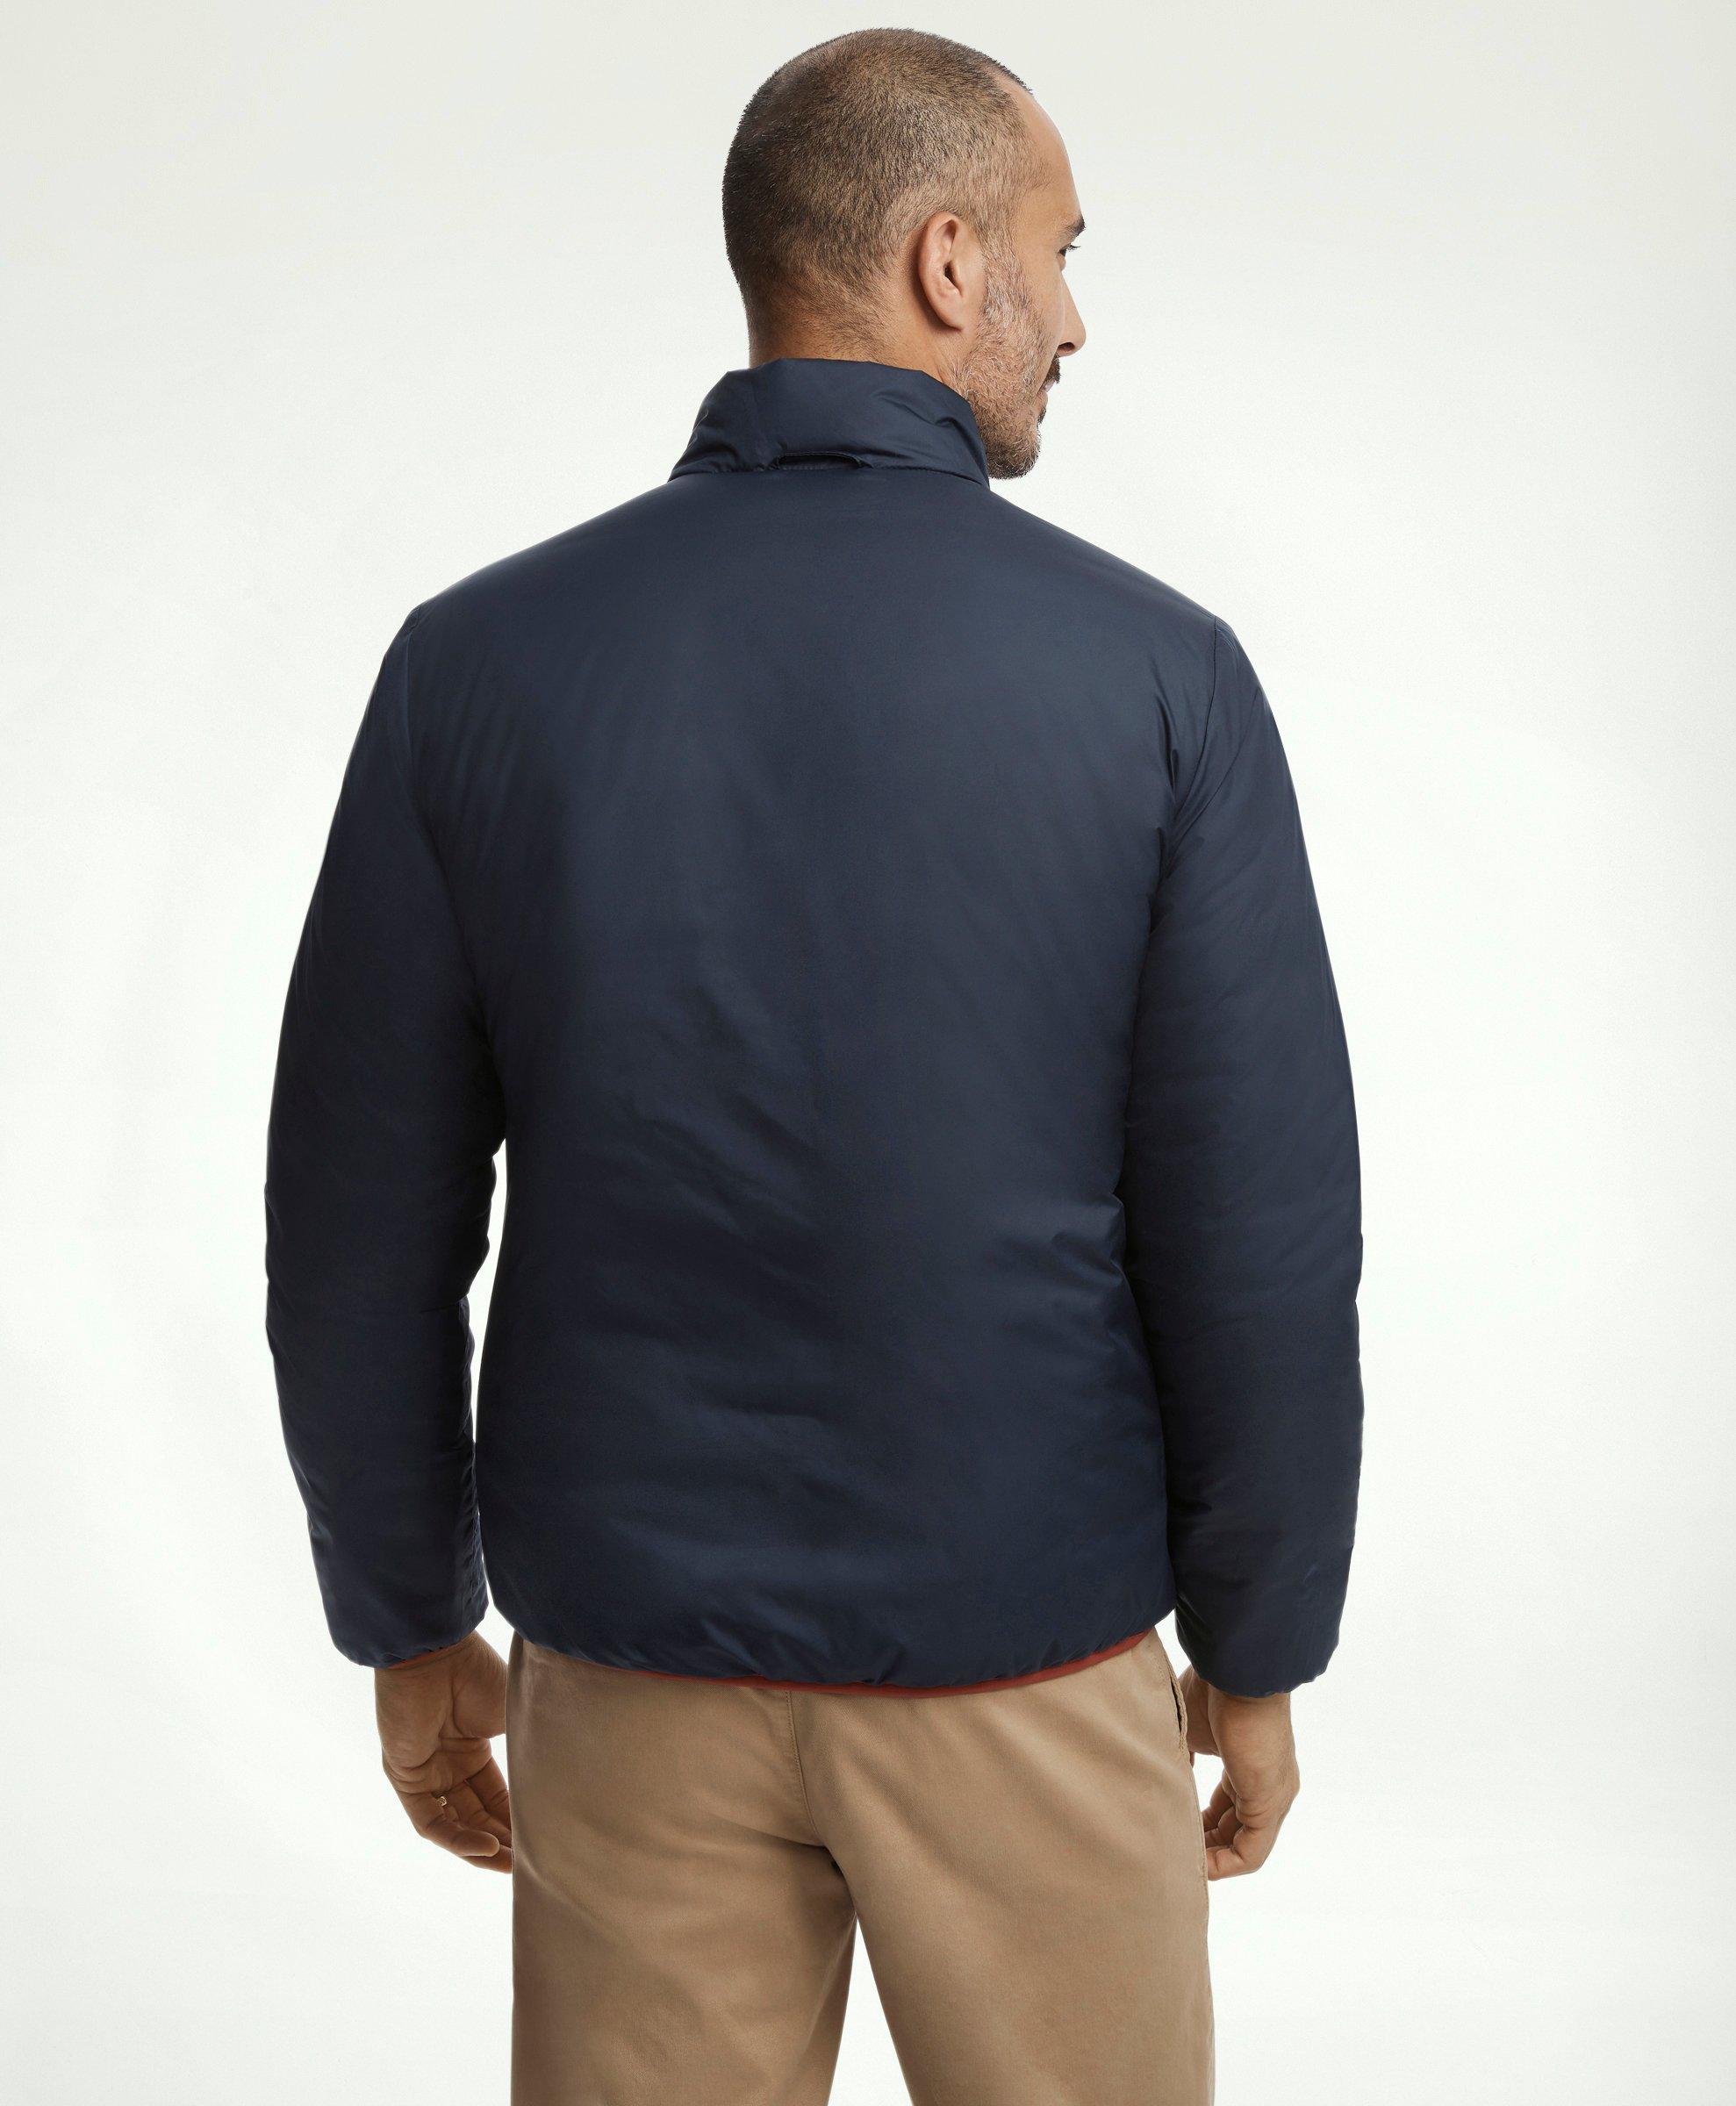 Reversible Puffer Jacket - Blue and Navy